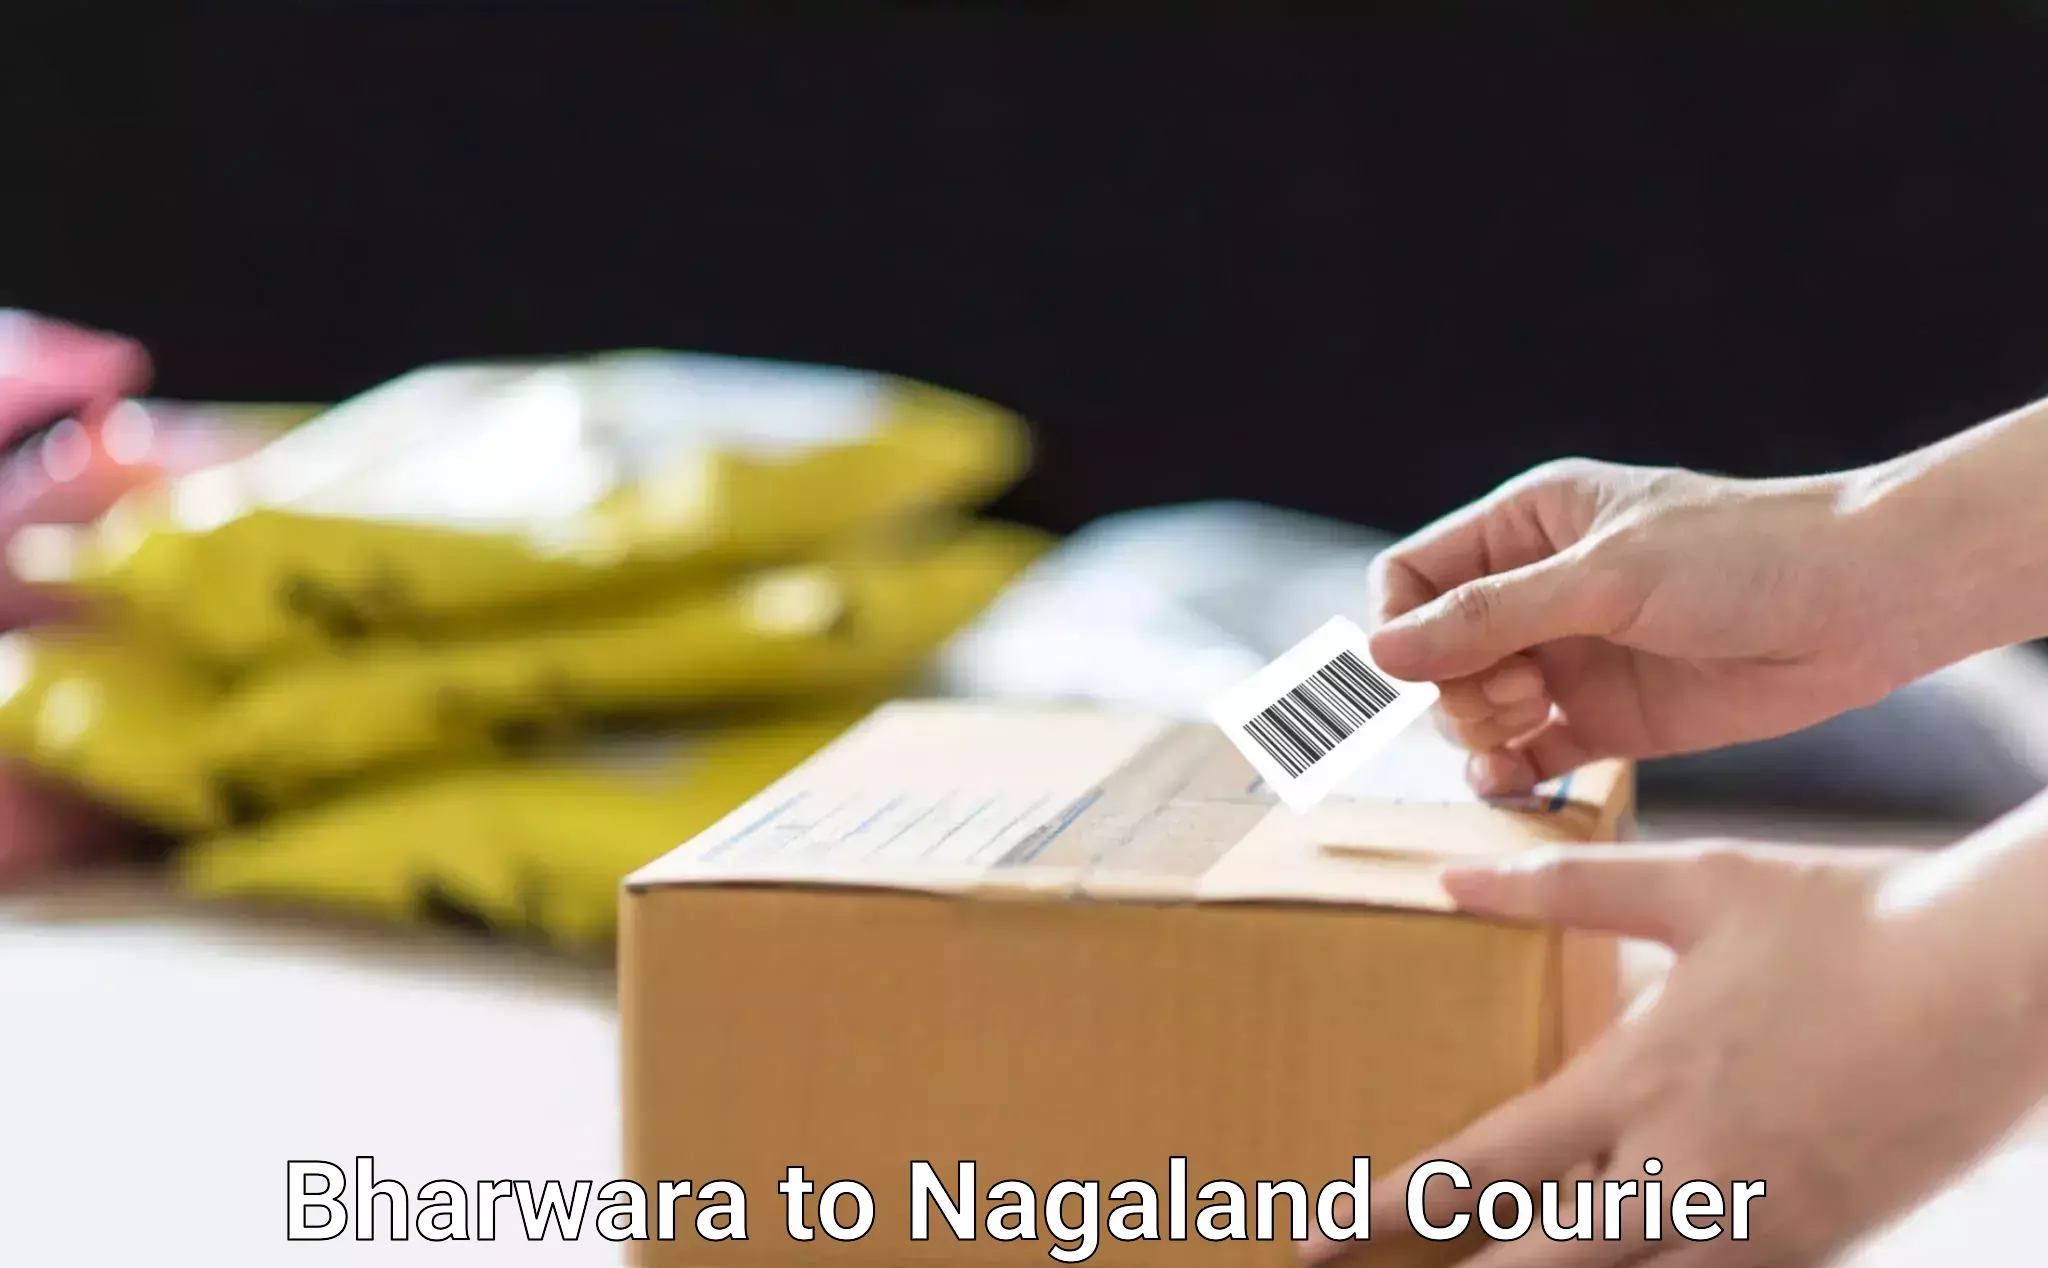 Furniture moving specialists Bharwara to Nagaland